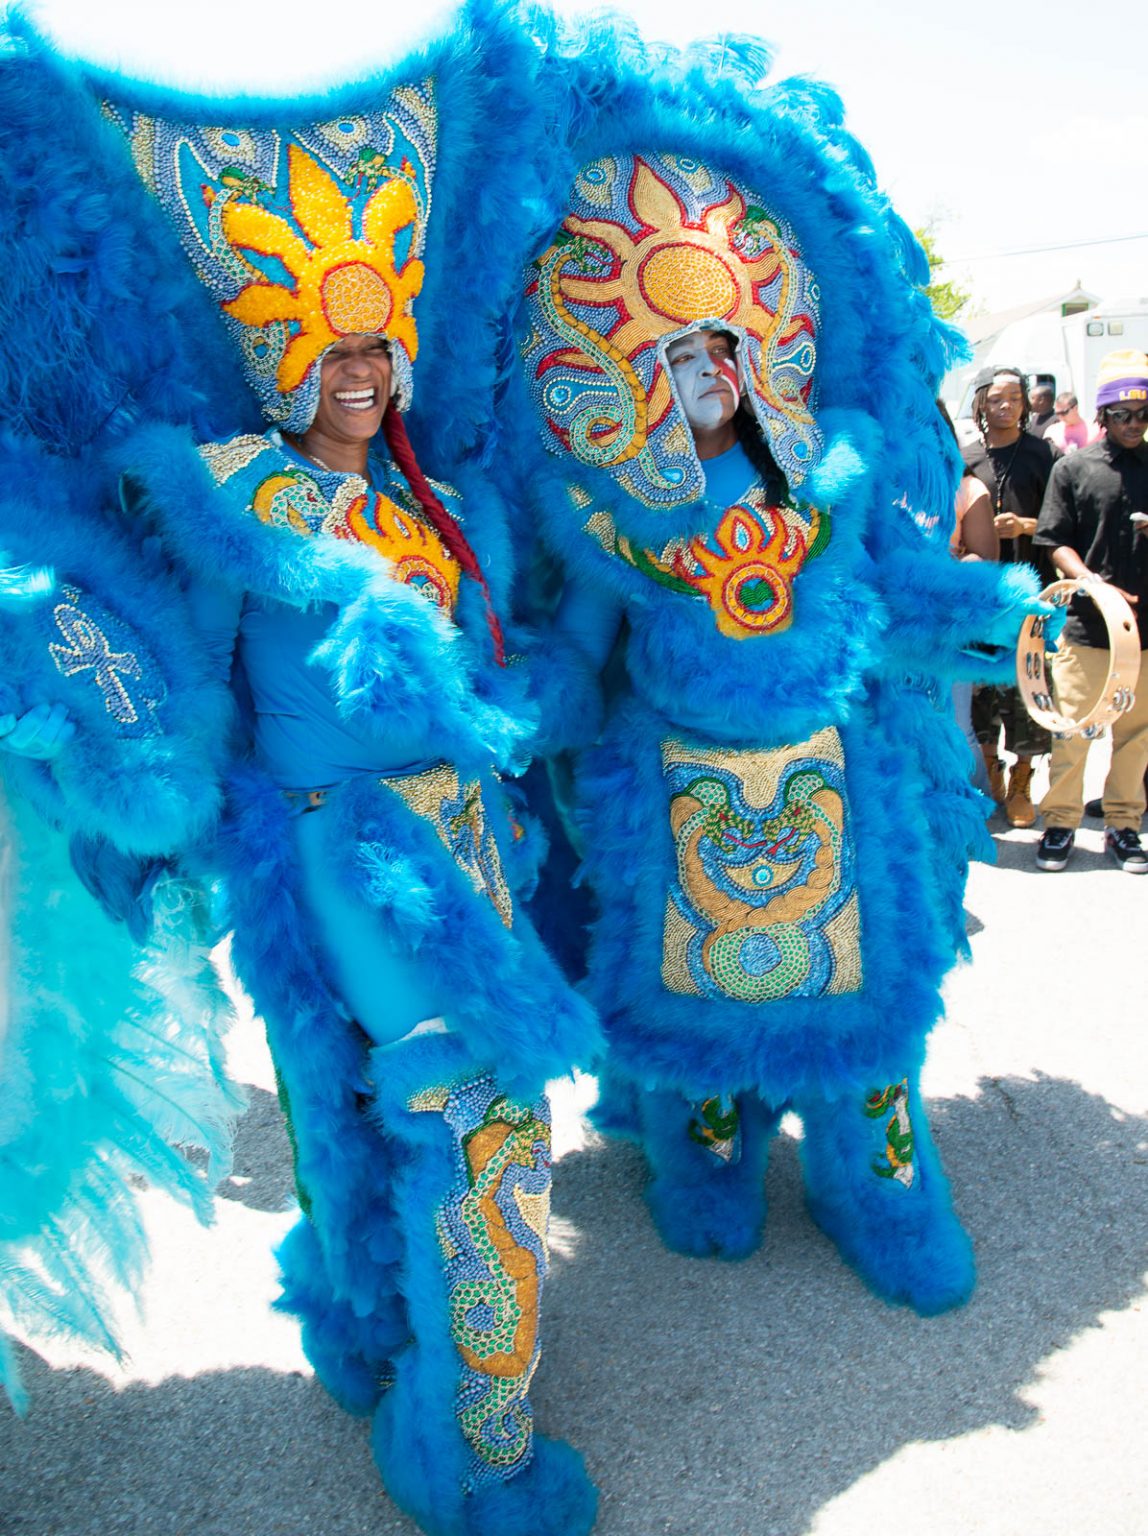 Mardi Gras Indians 2013, New Orleans, Westbank